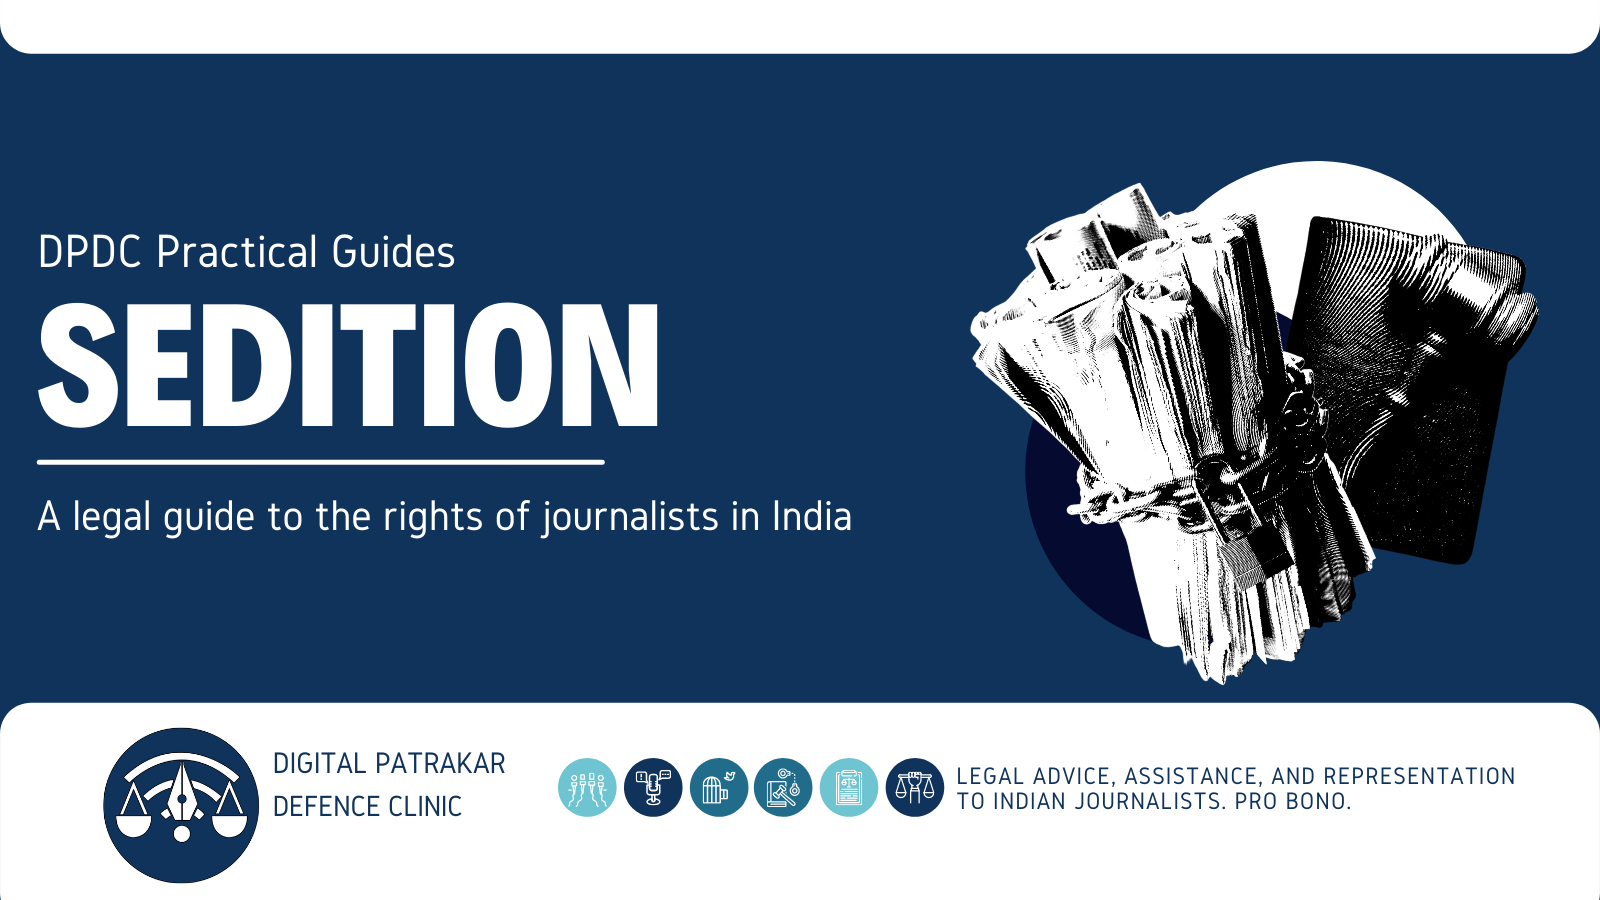 DPDC PRACTICAL GUIDE SERIES | SEDITION